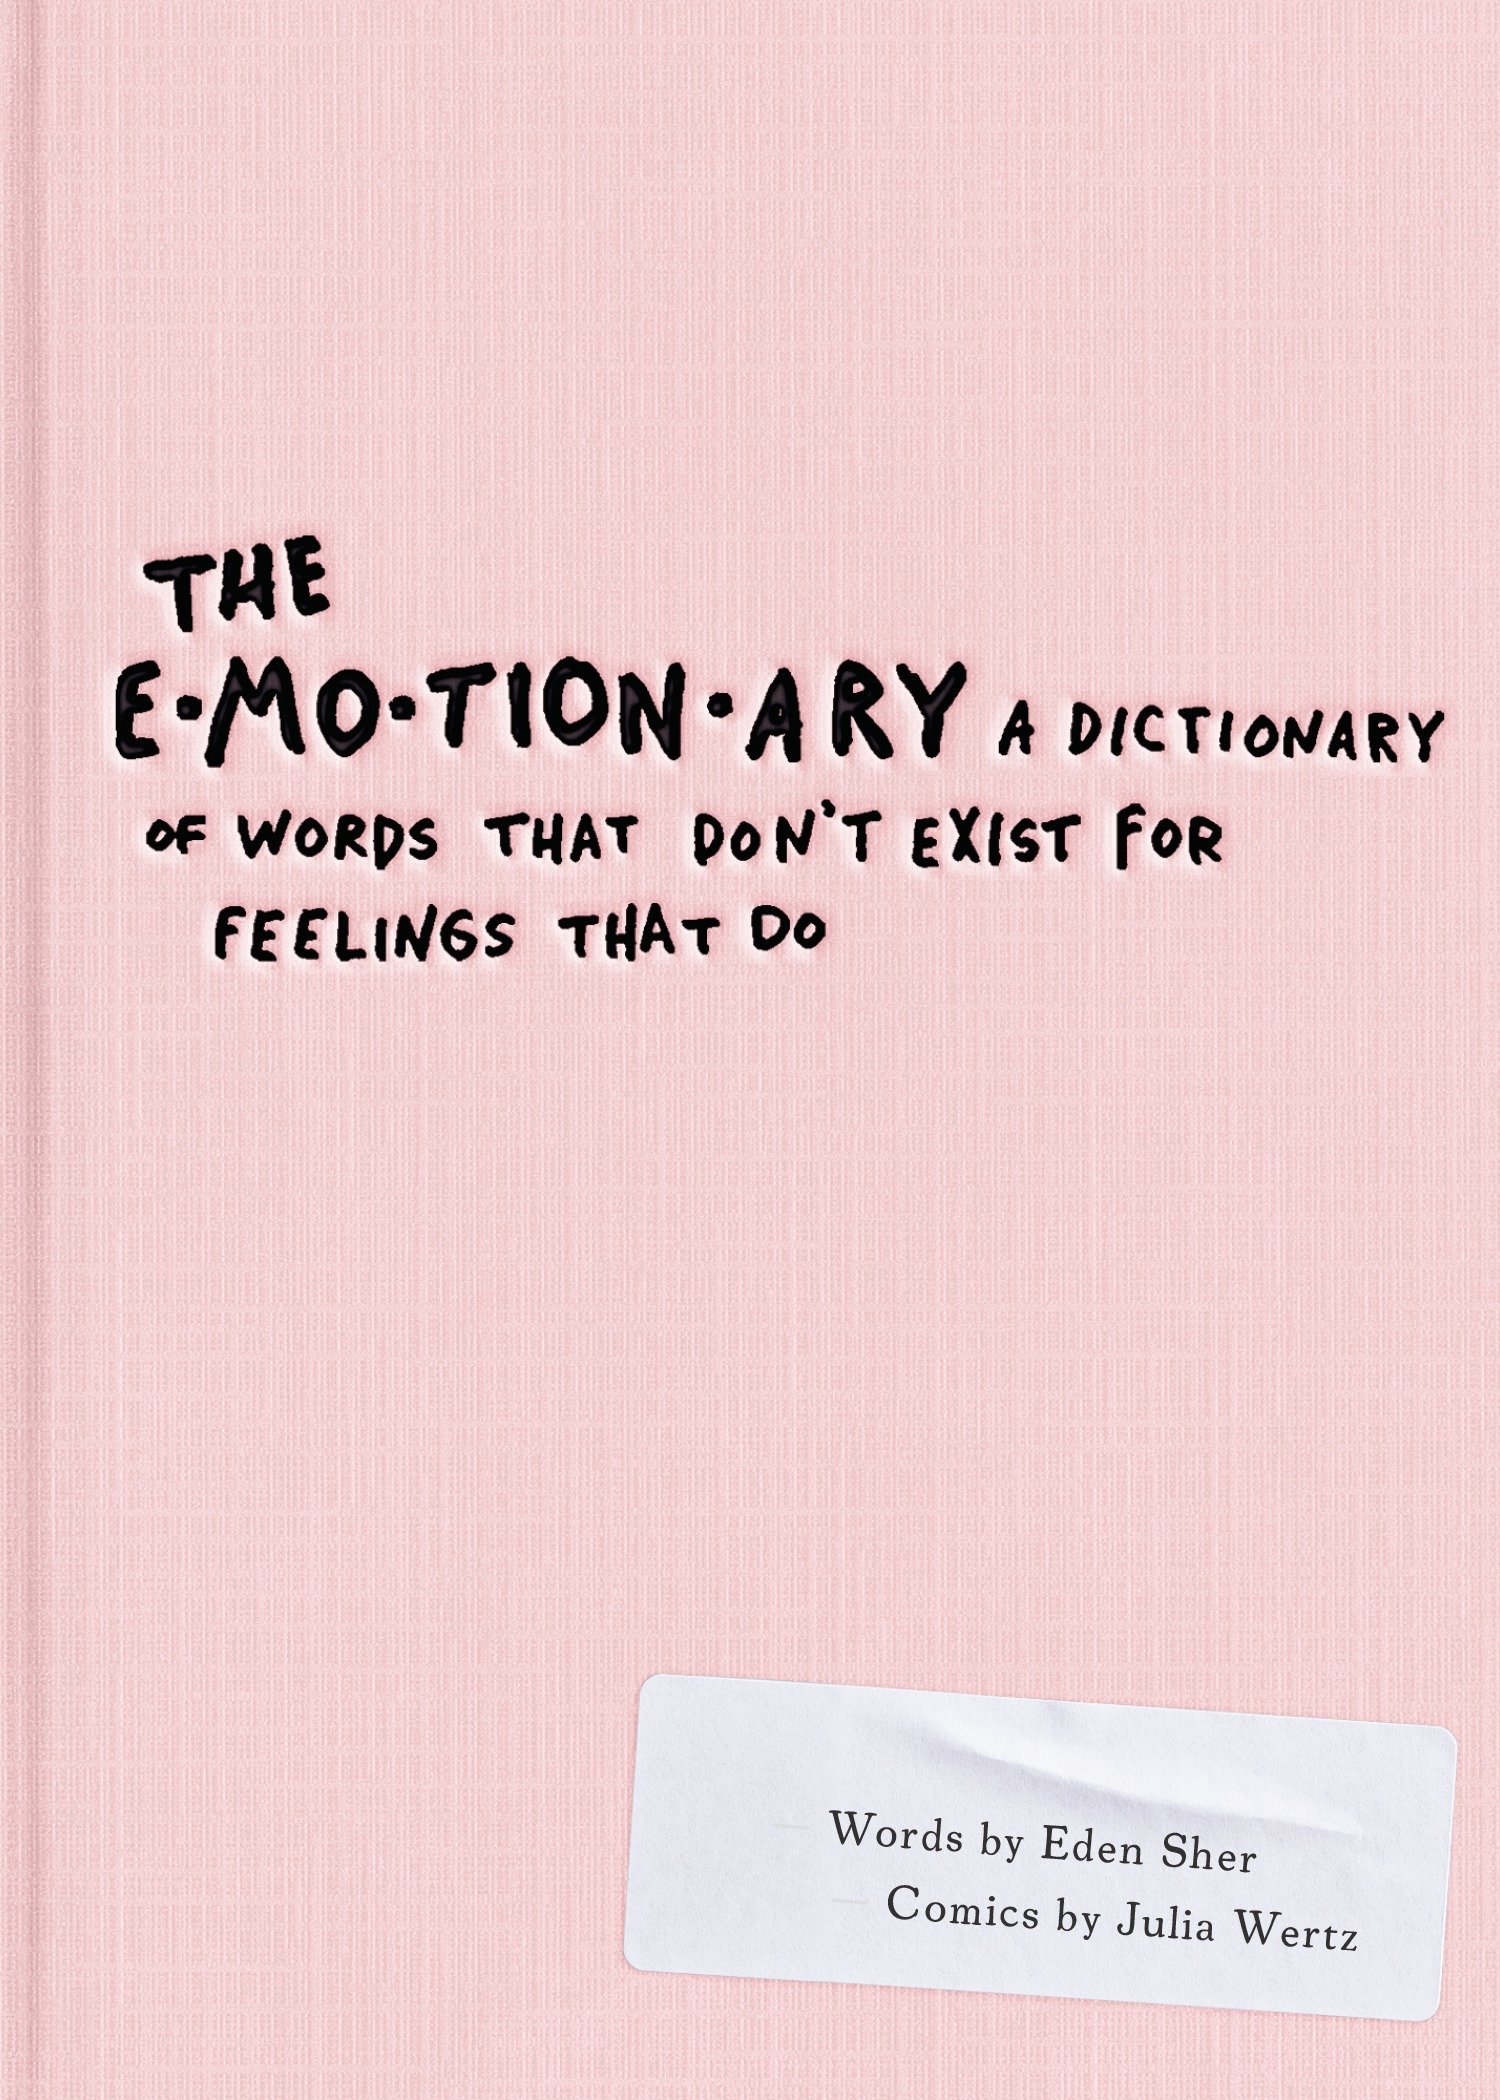 Emotionary: A Disctionary of Warods That Don't Exist For Feelings That Do